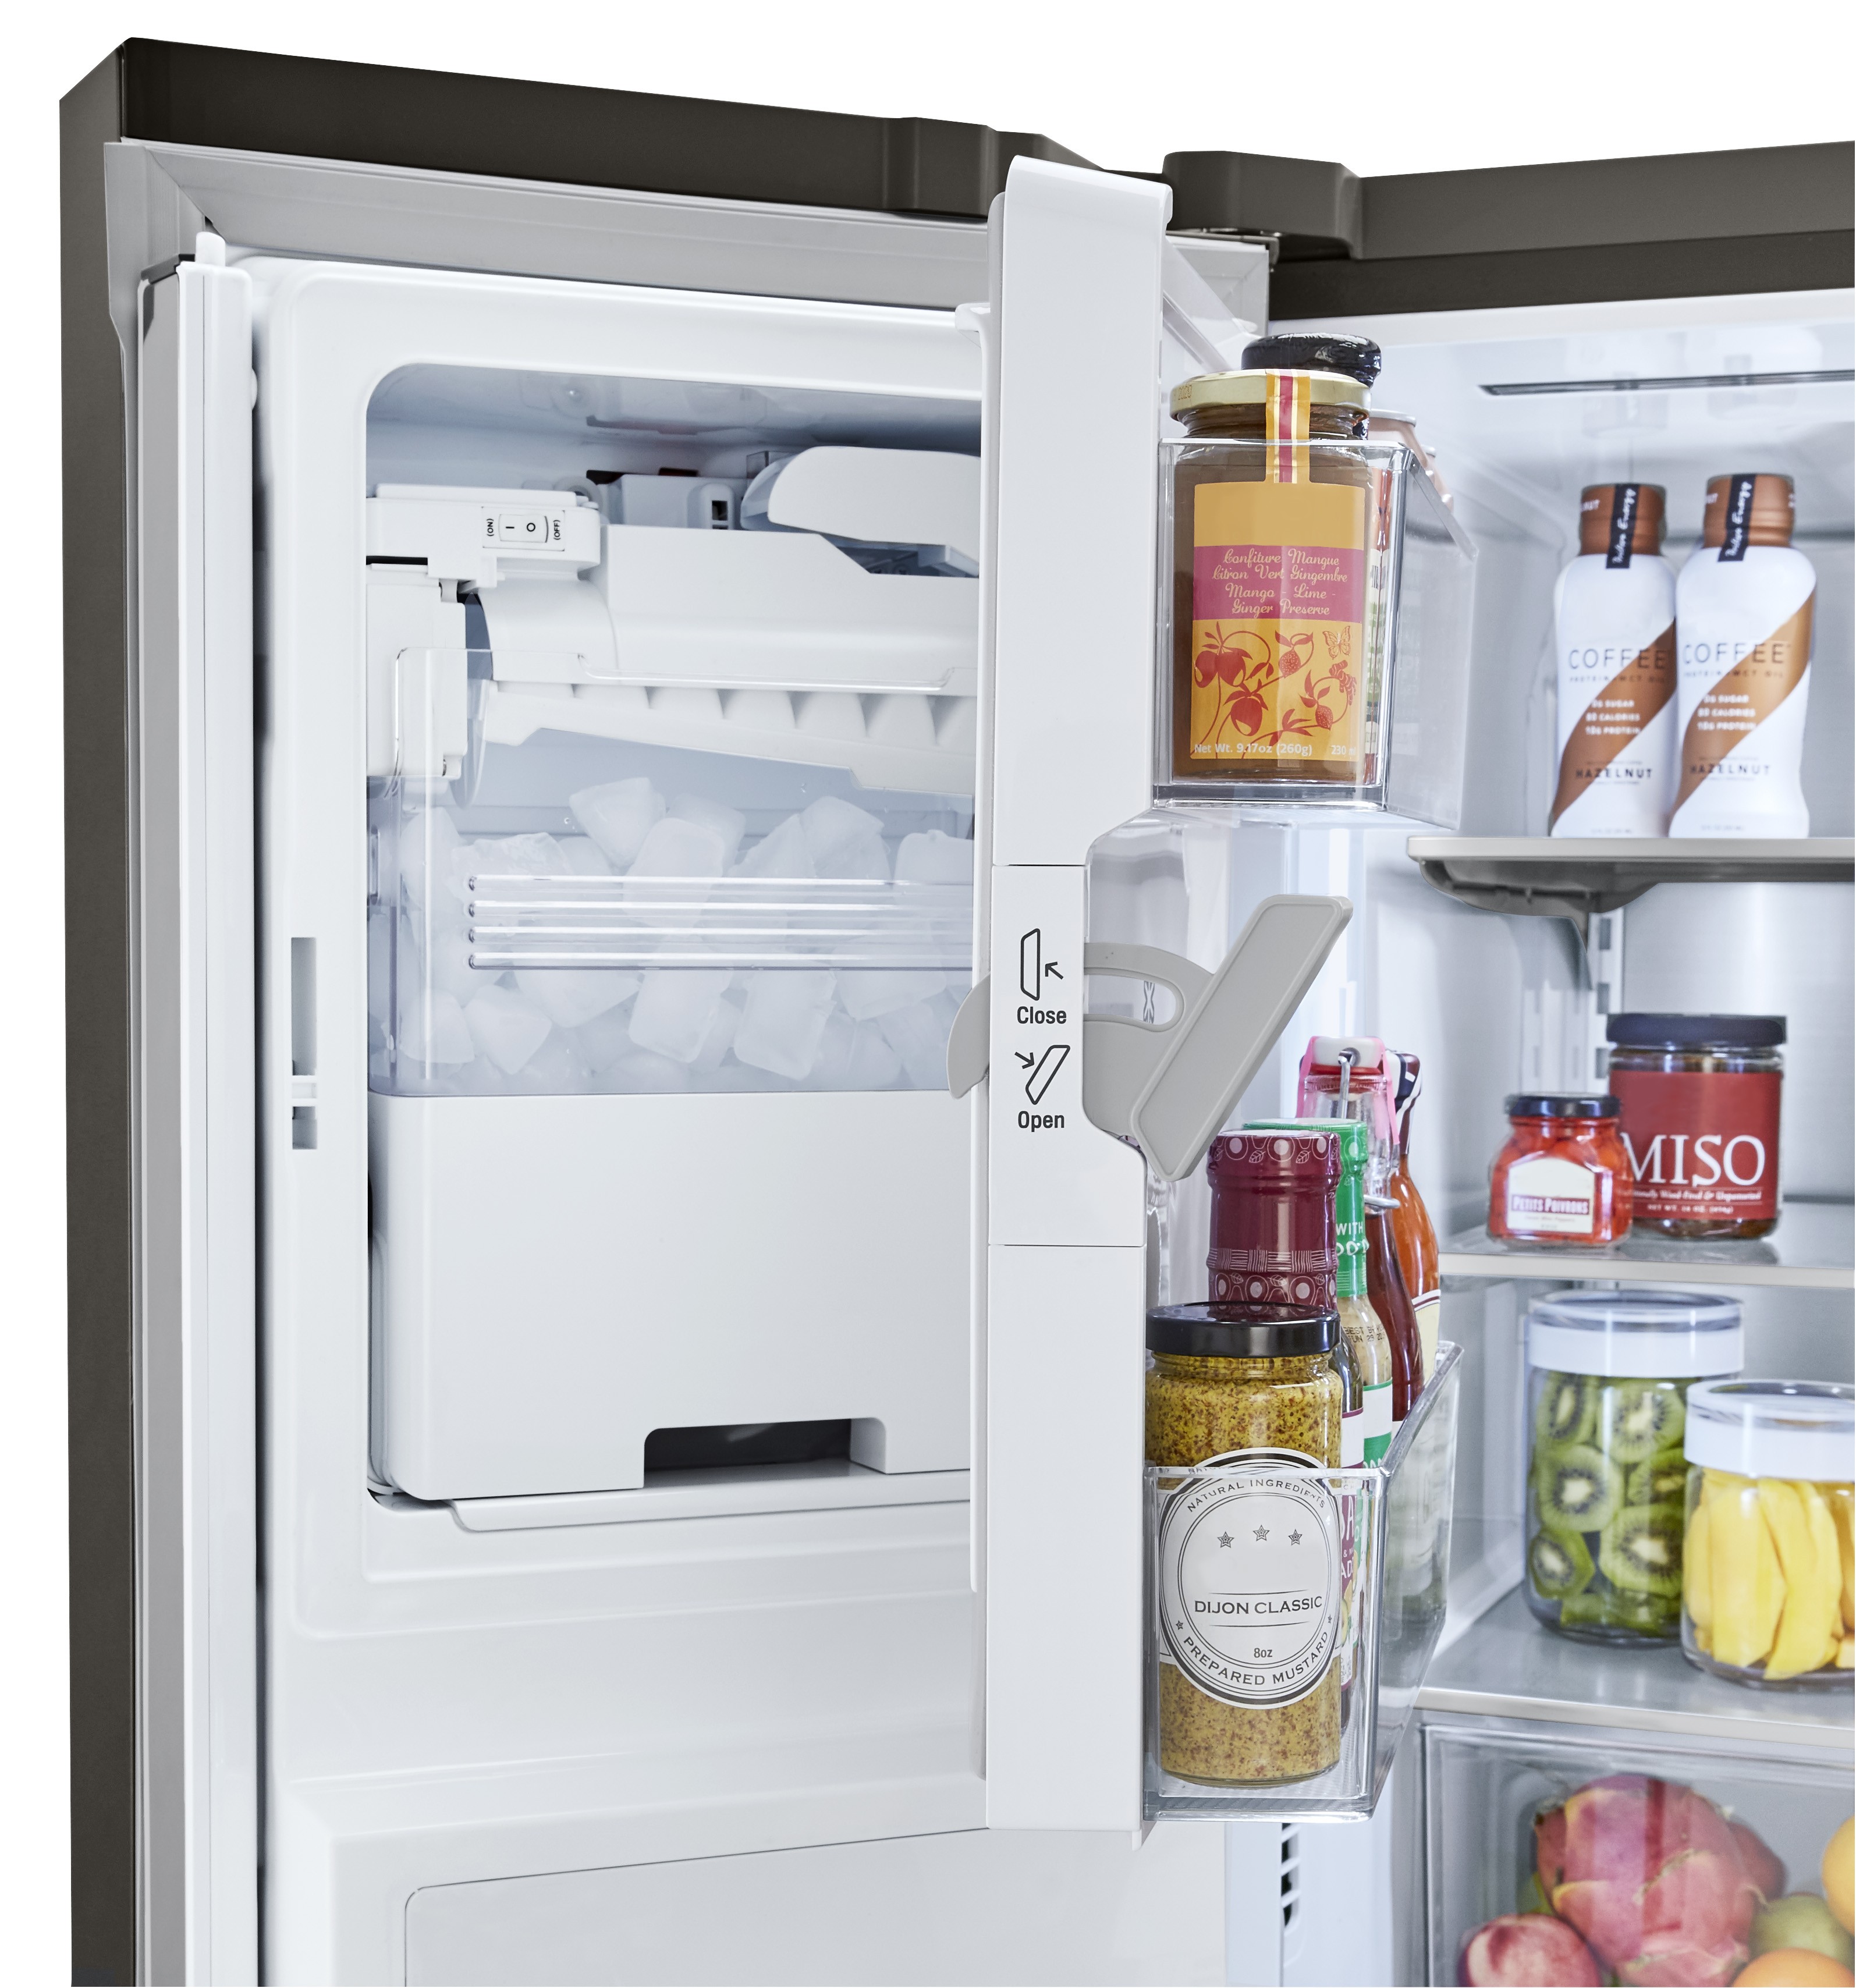 LG refrigerator partially opened to show the interior of its door-ice maker.